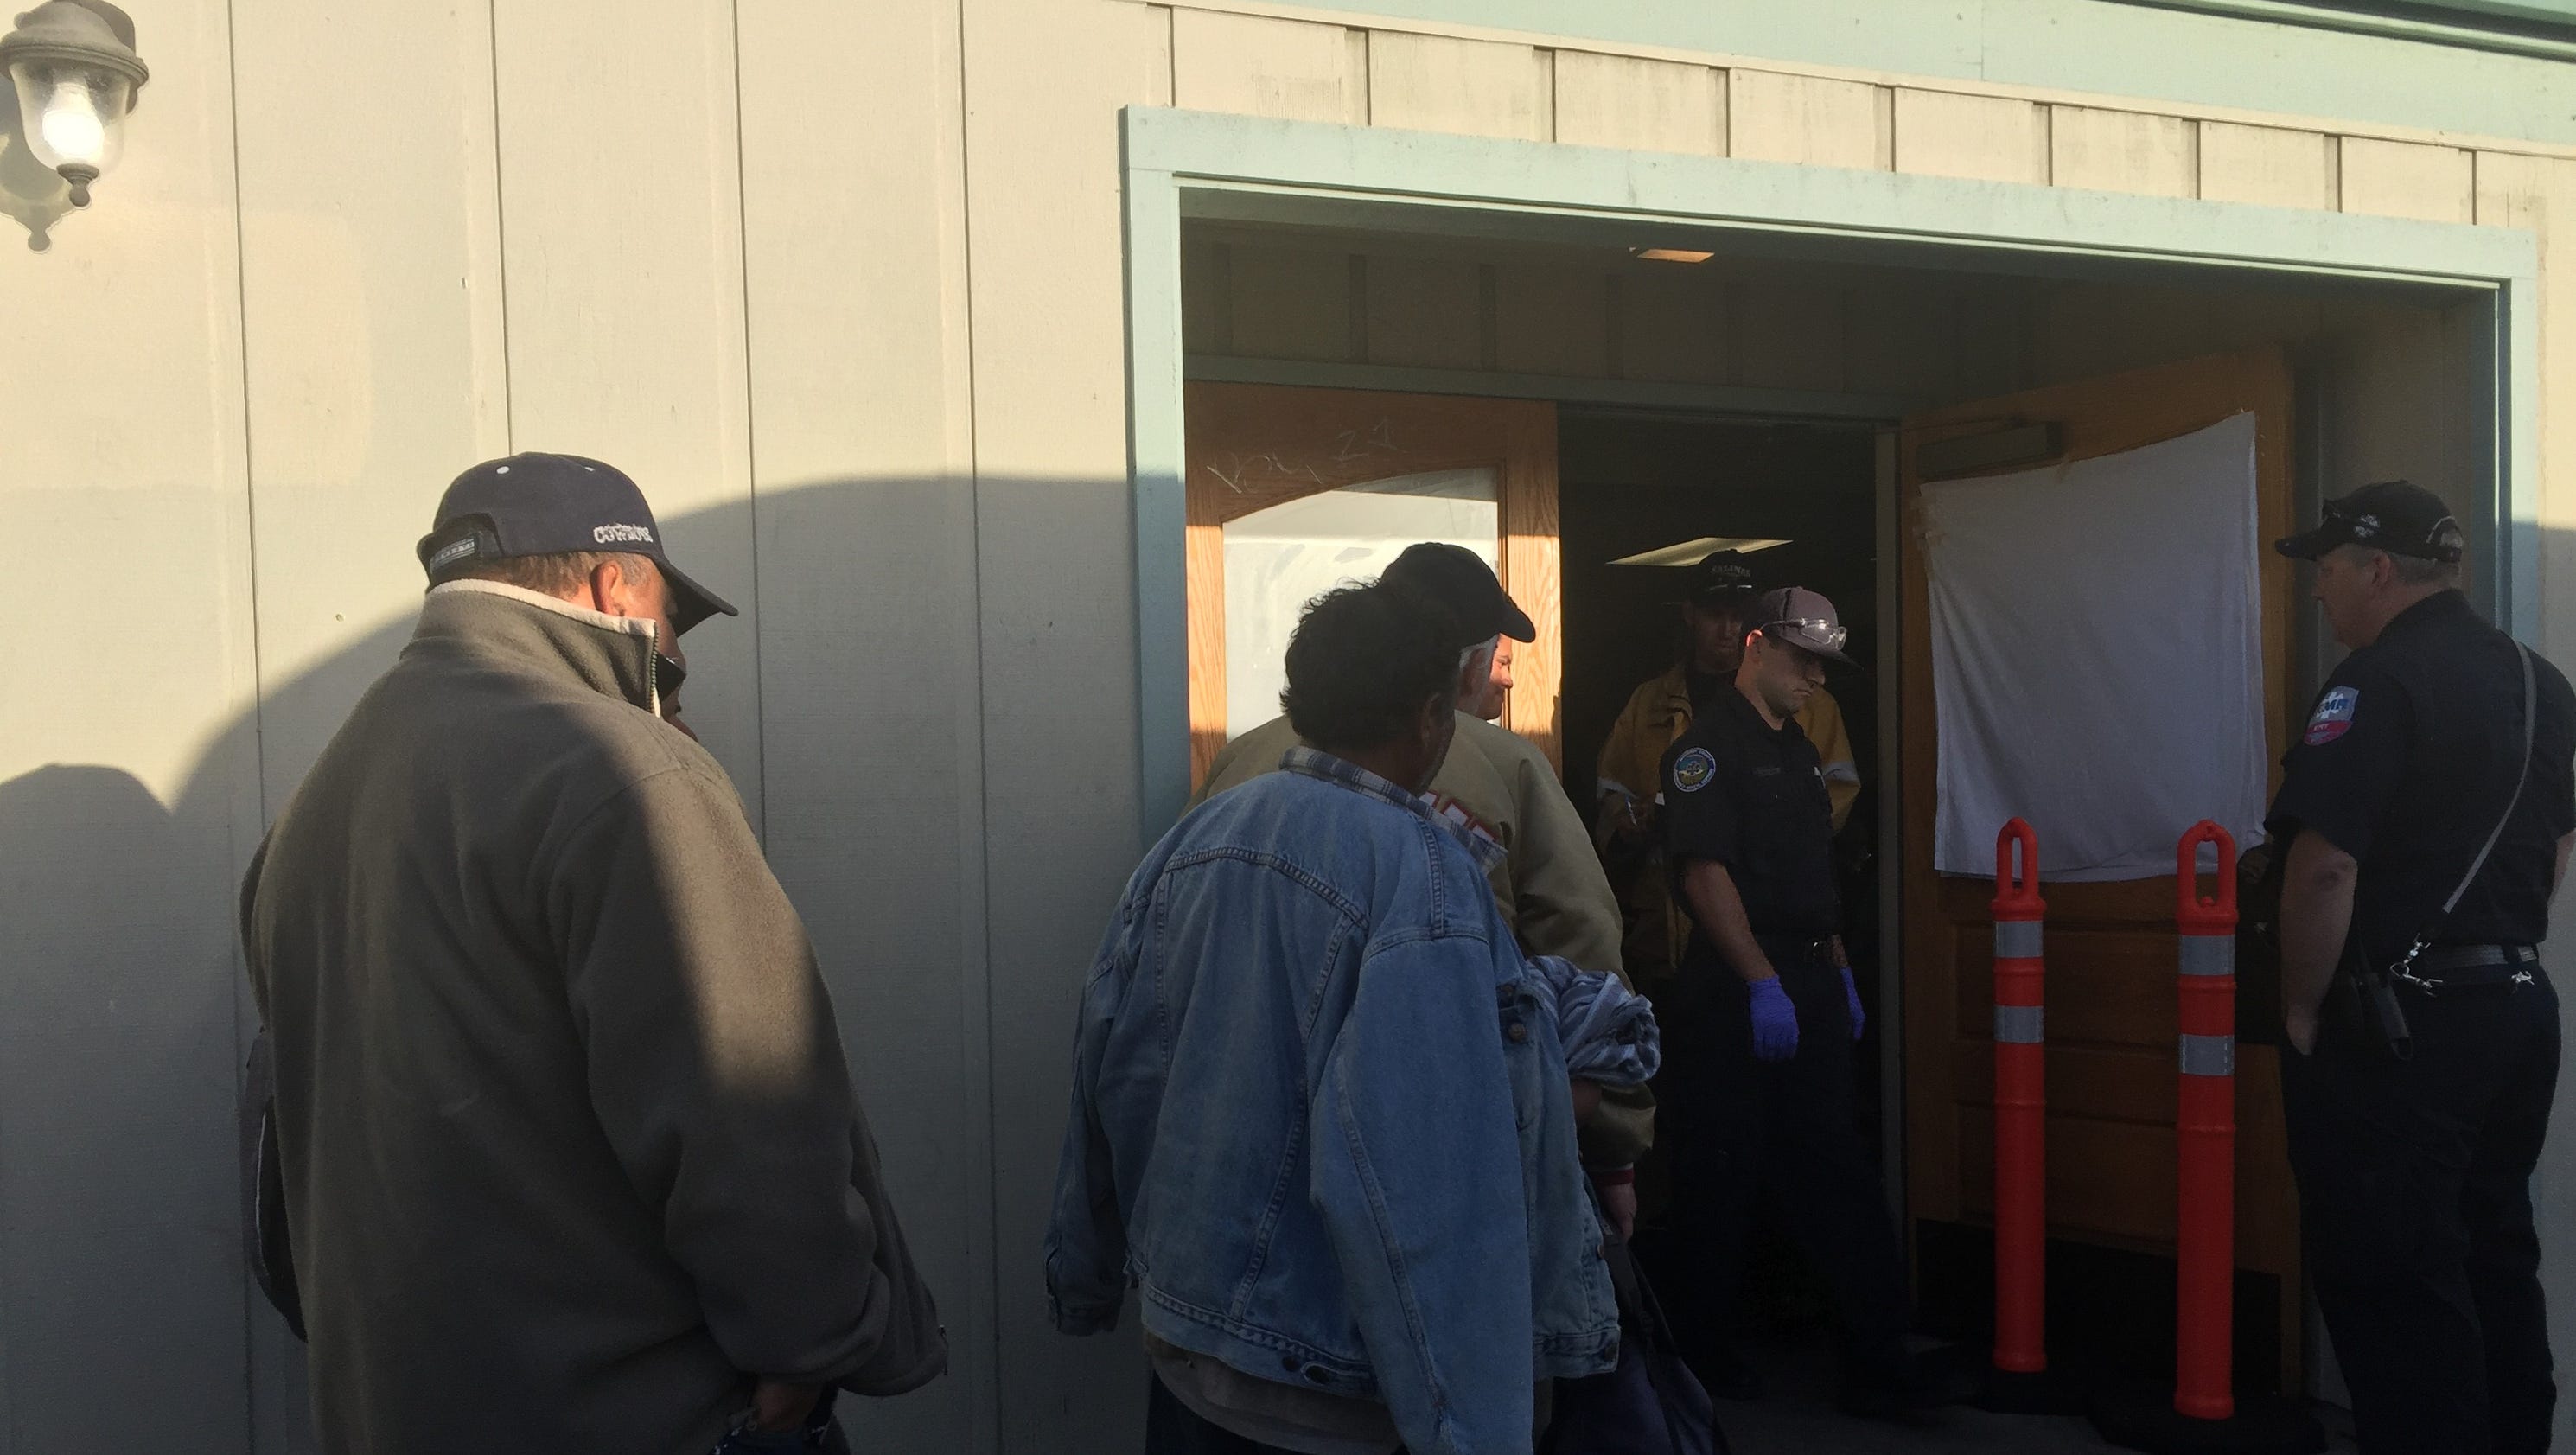 Warming shelters in Salinas to shut - The Salinas Californian - The Salinas Californian